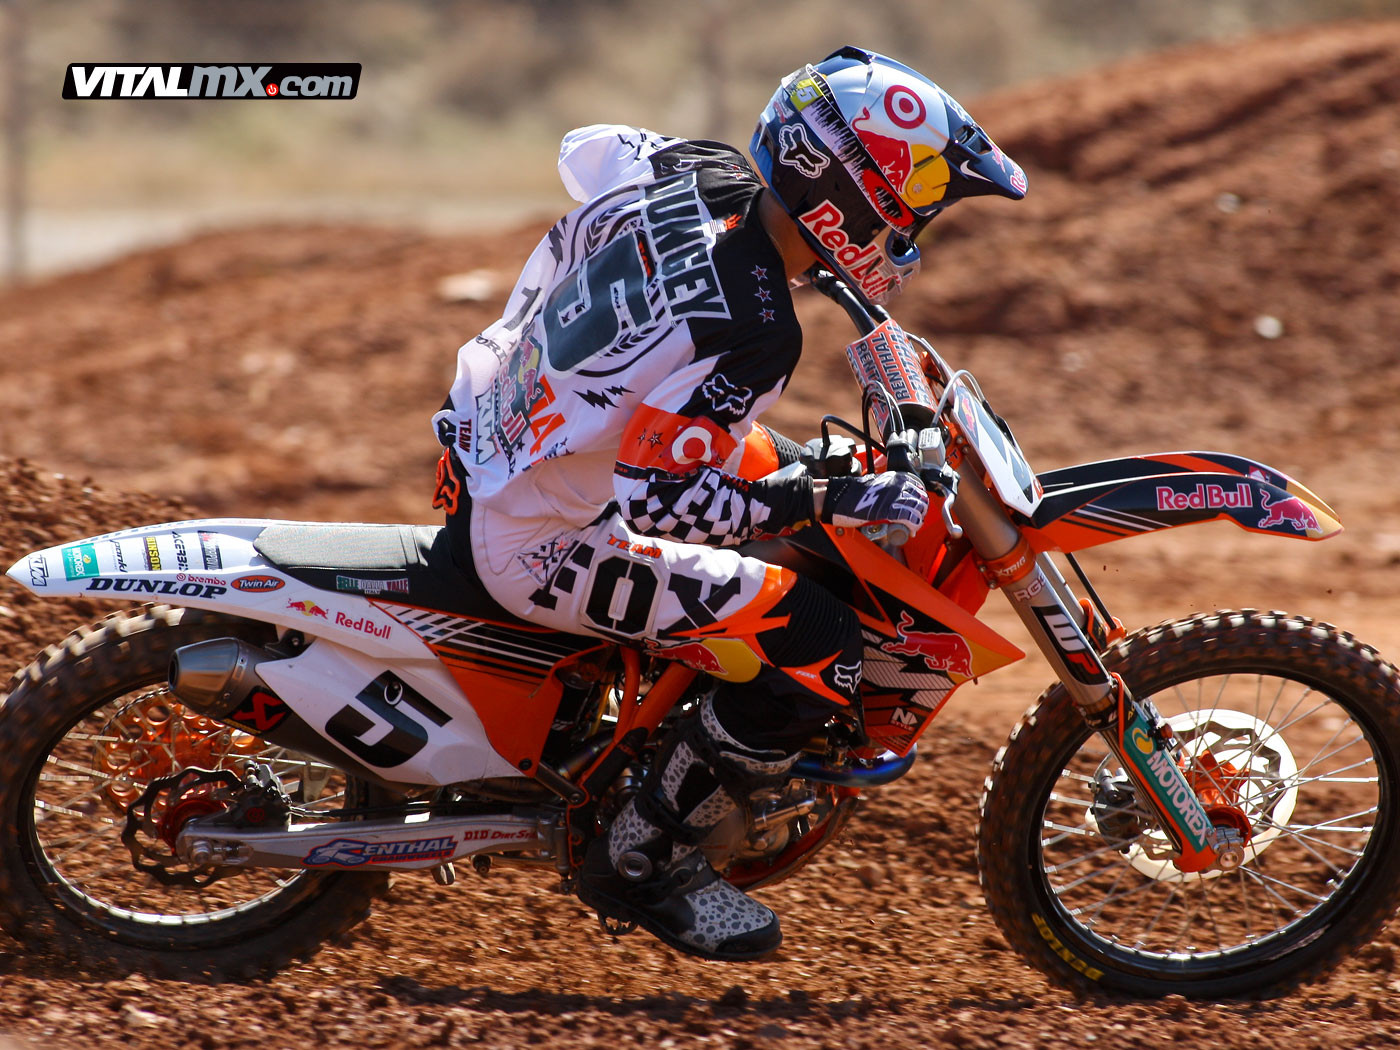 Ryan Dungey - Ktm Wallpapers - Motocross Pictures - - Ryan Dungey Motocross Ktm 5 - HD Wallpaper 